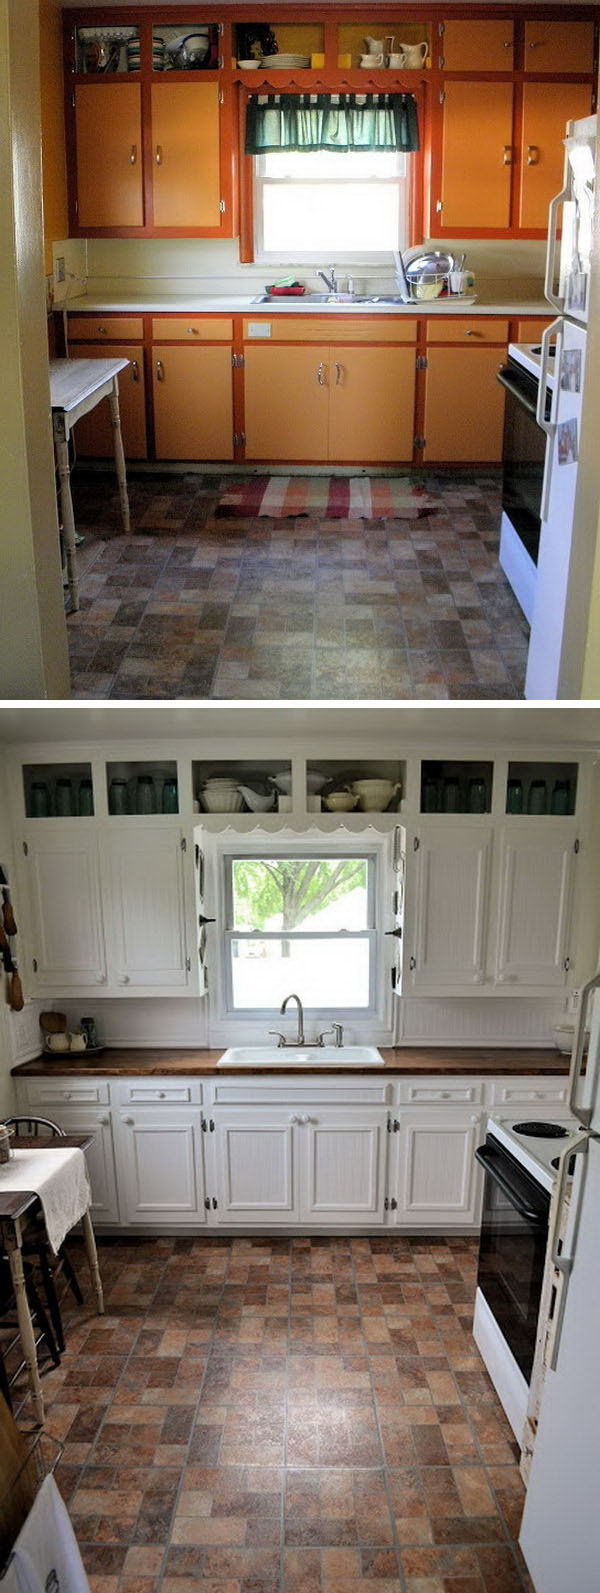 9 10 Before And After Kitchen Makeover 